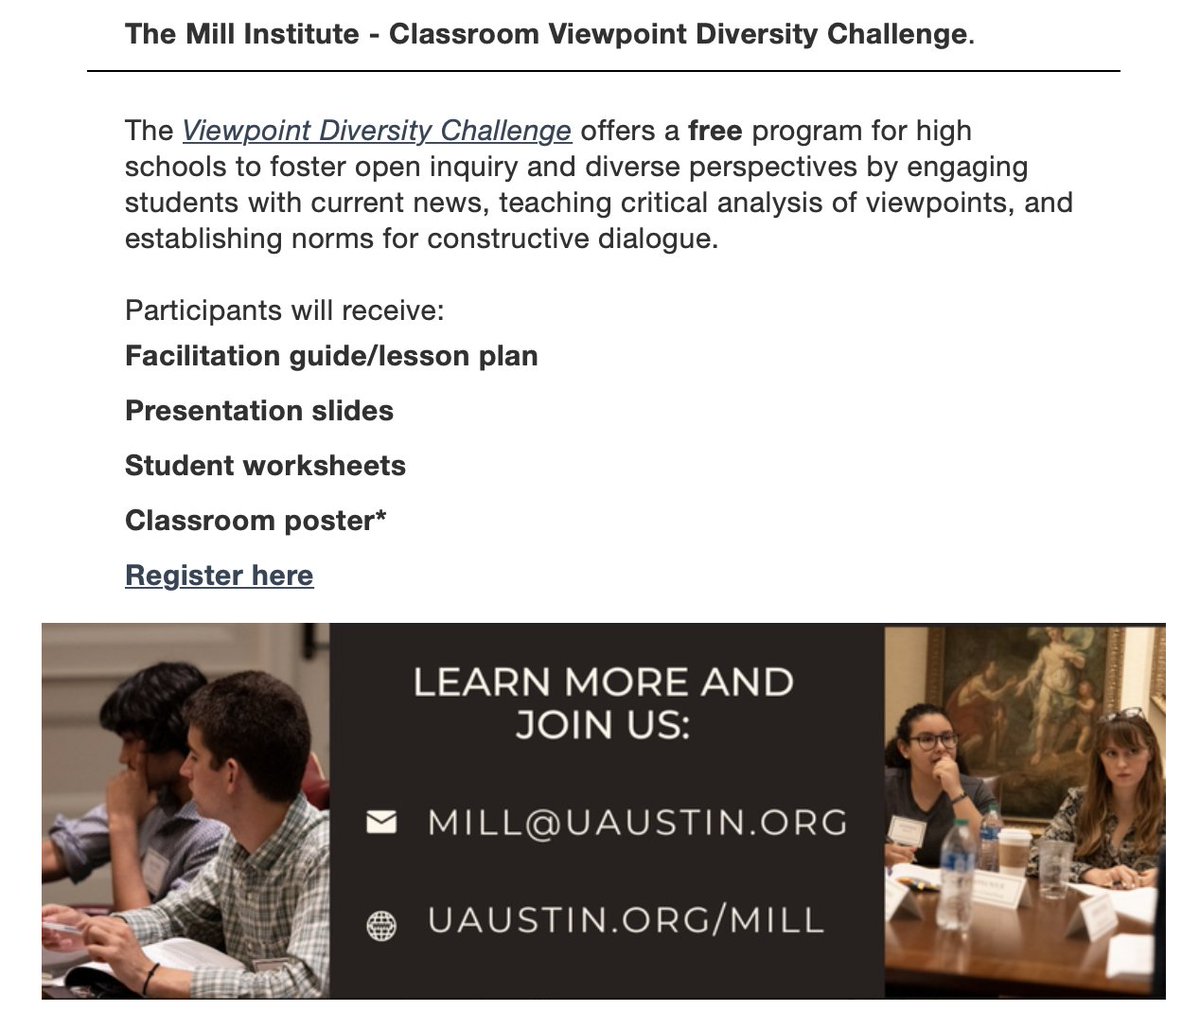 The Mill Institute (@millatuatx) is offering the Classroom Viewpoint Diversity Challenge as a *FREE* program for high schools to foster productive disagreement. 6n9a5cu8k1u.typeform.com/vdc2-0?typefor…